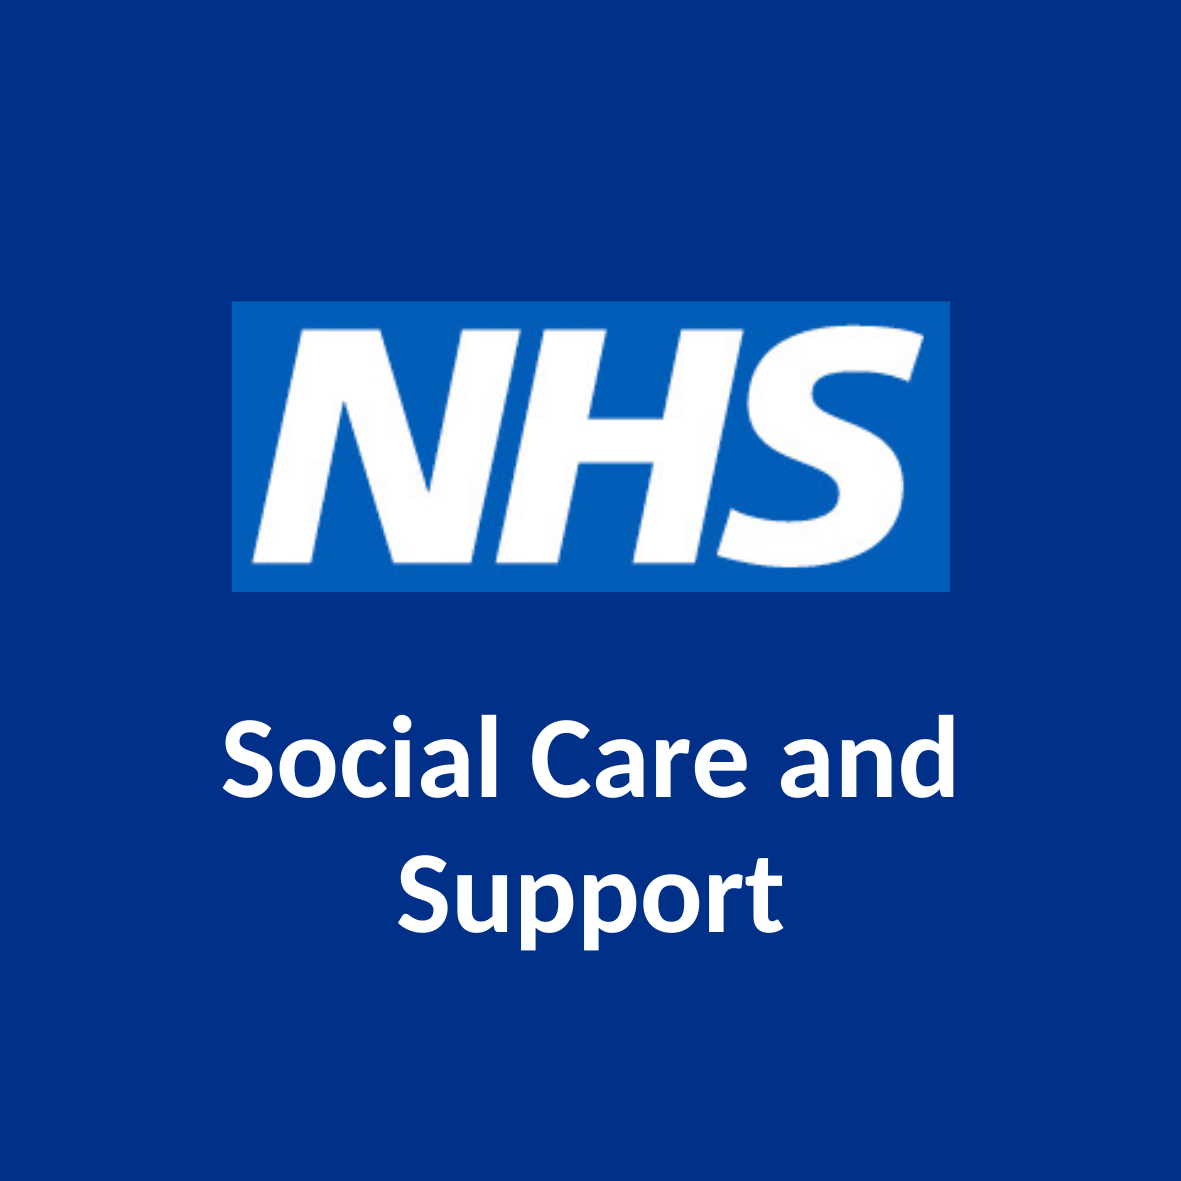 NHS Logo With Words 'Social Care and Support